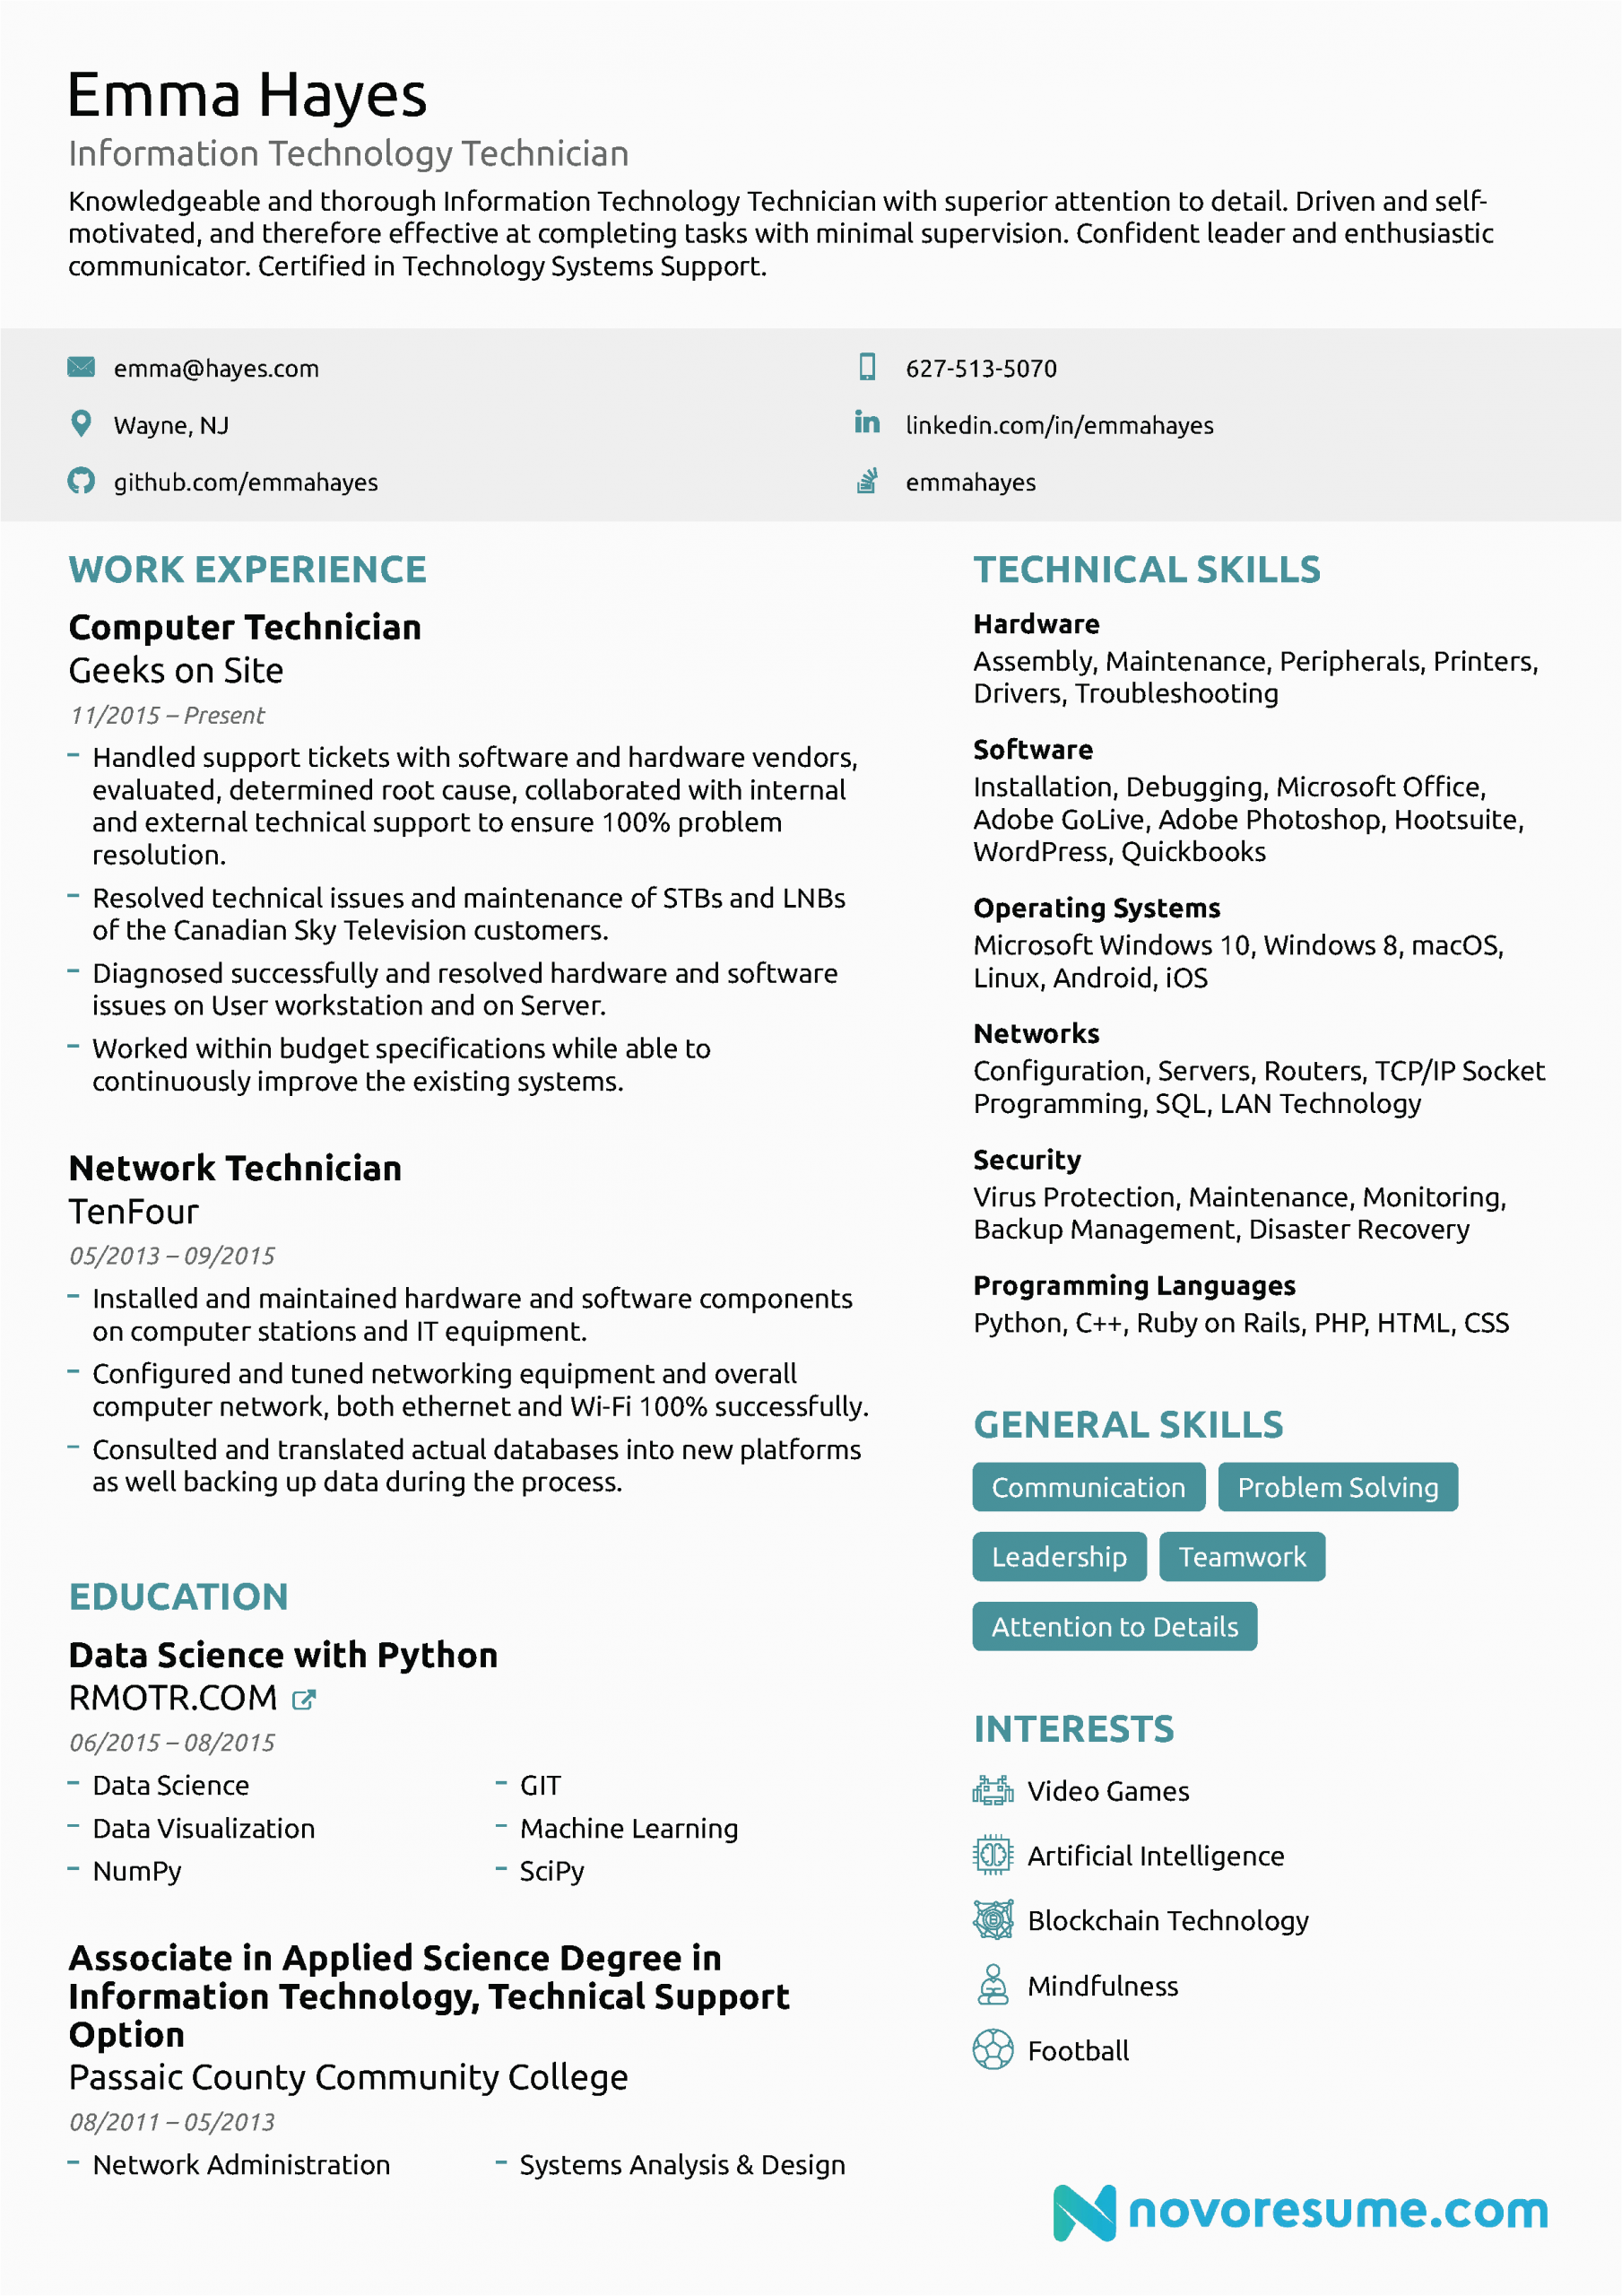 Sample Resume Template for It Professional It Resume How to Guide for 2021 [11 Samples]